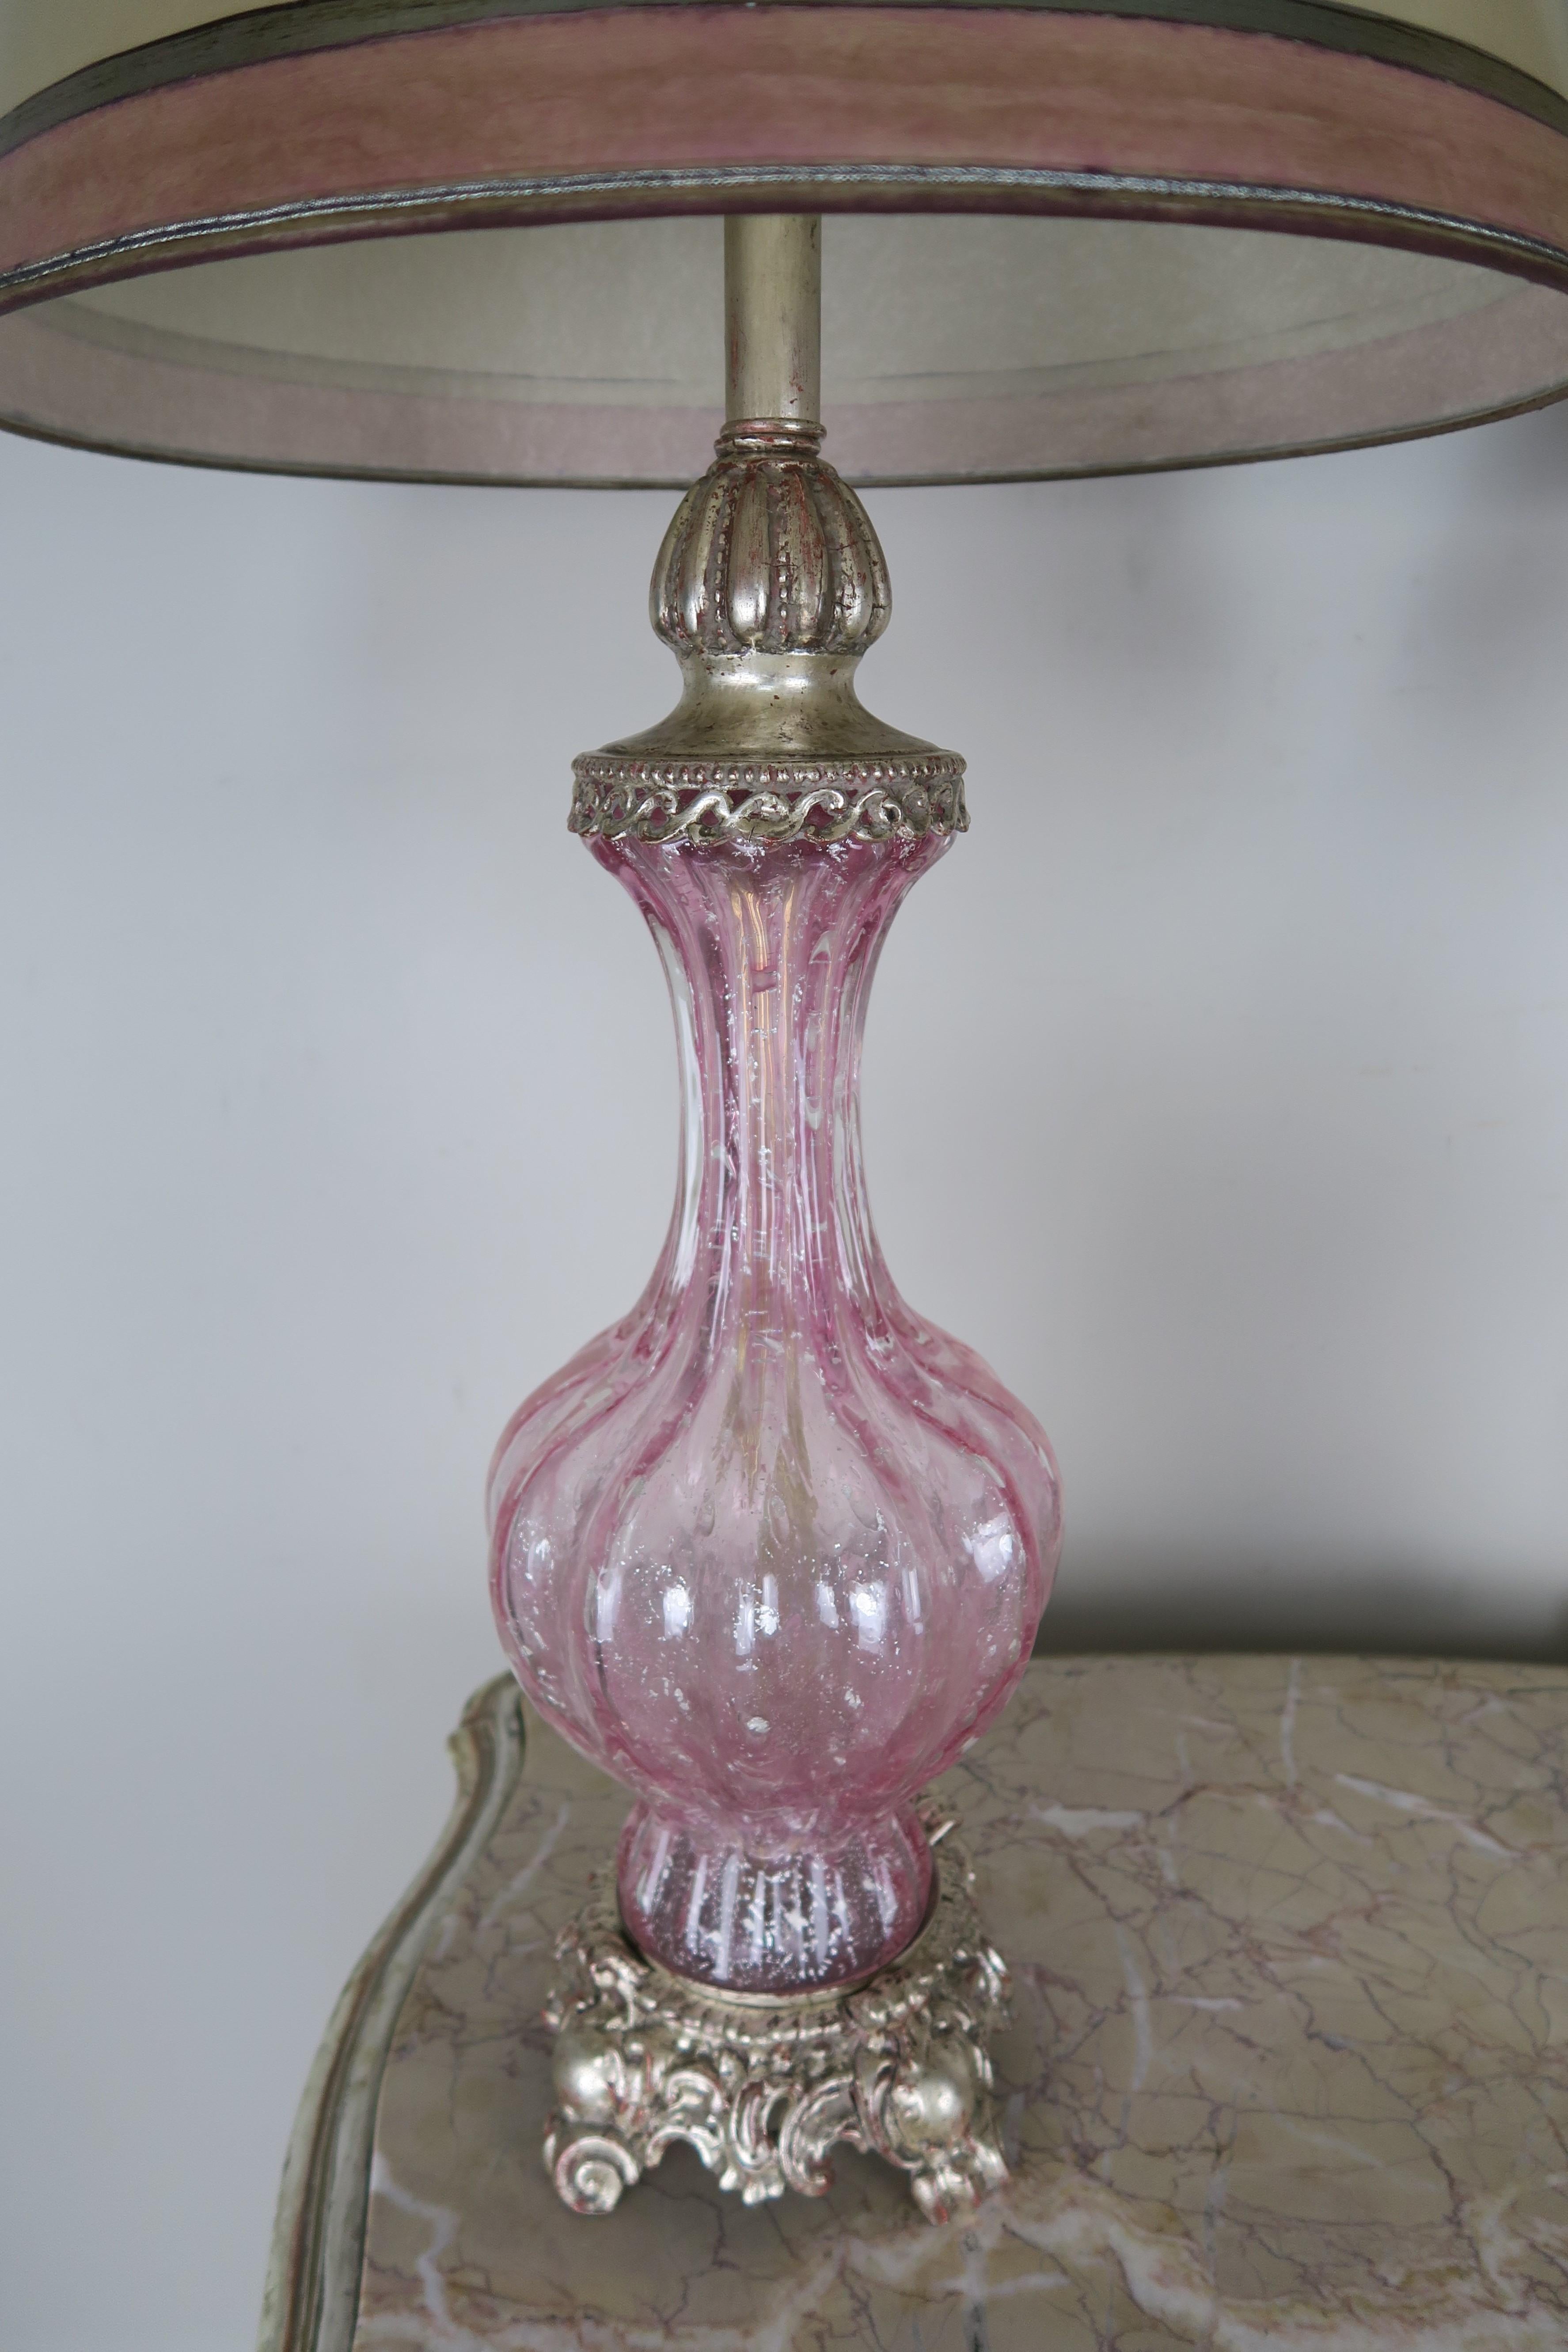 Pair of Italian pink Murano glass lamps standing on silver leaf metal bases. The shades are hand painted parchment in coordinating colors of pink and silver. The lamps are newly rewired and are in working condition.